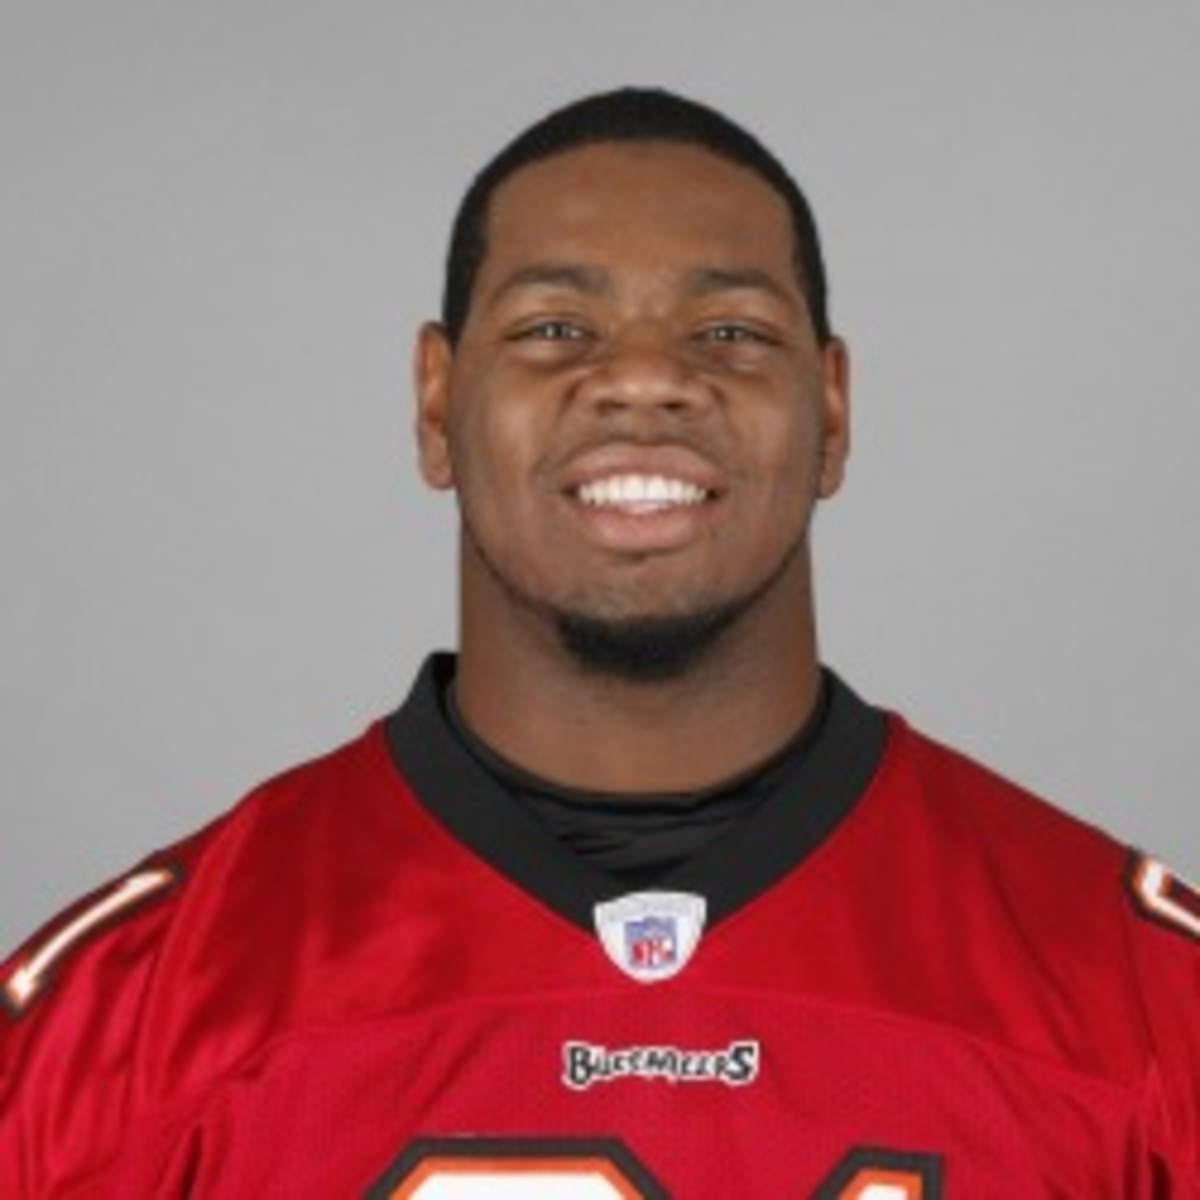 Buccaneers defensive end Da’Quan Bowers was arrested and charged with criminal possession of a weapon. (Getty Images)